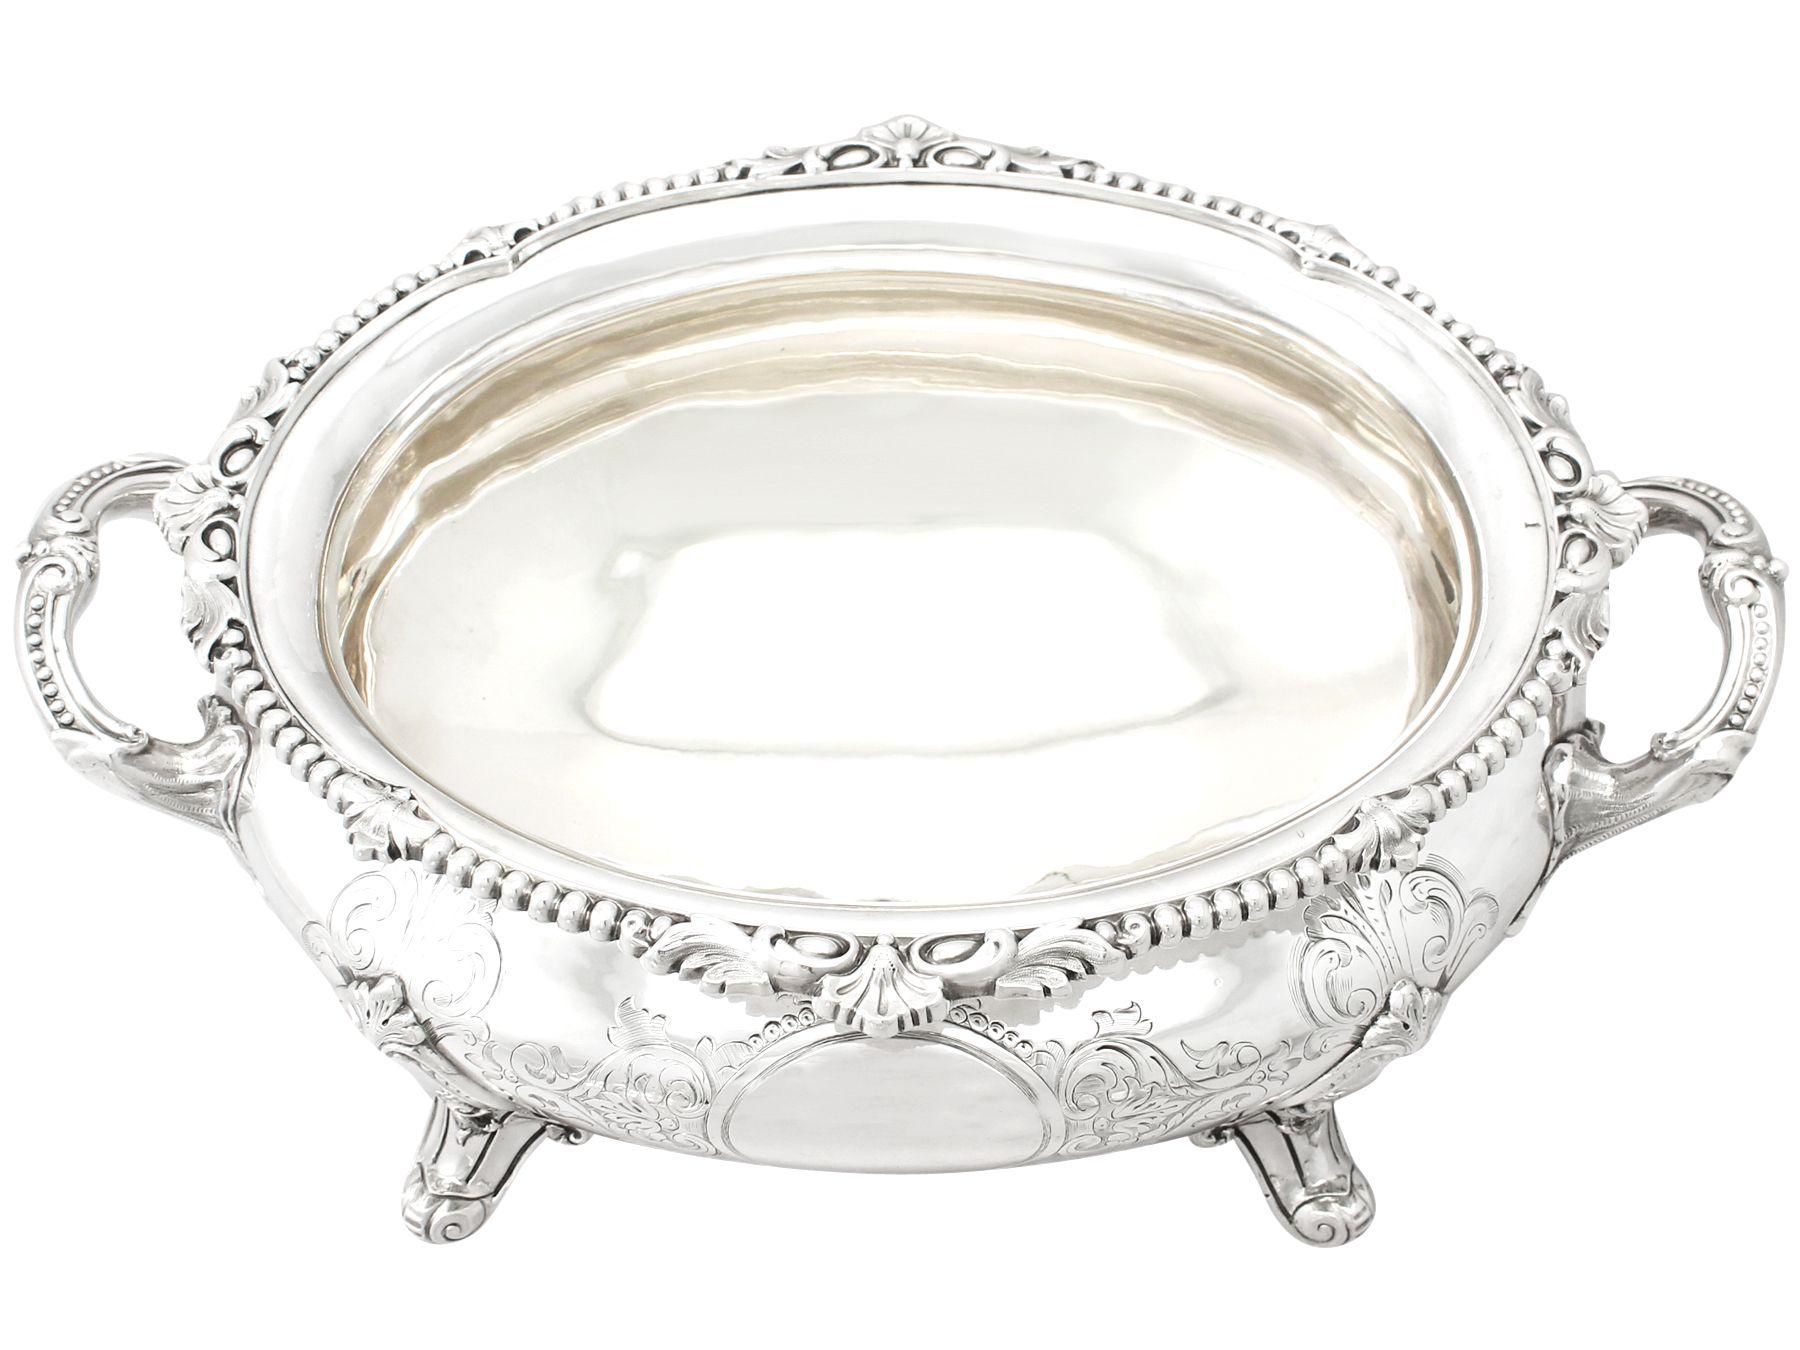 Late 19th Century 1871 Victorian Sterling Silver Soup Tureen For Sale